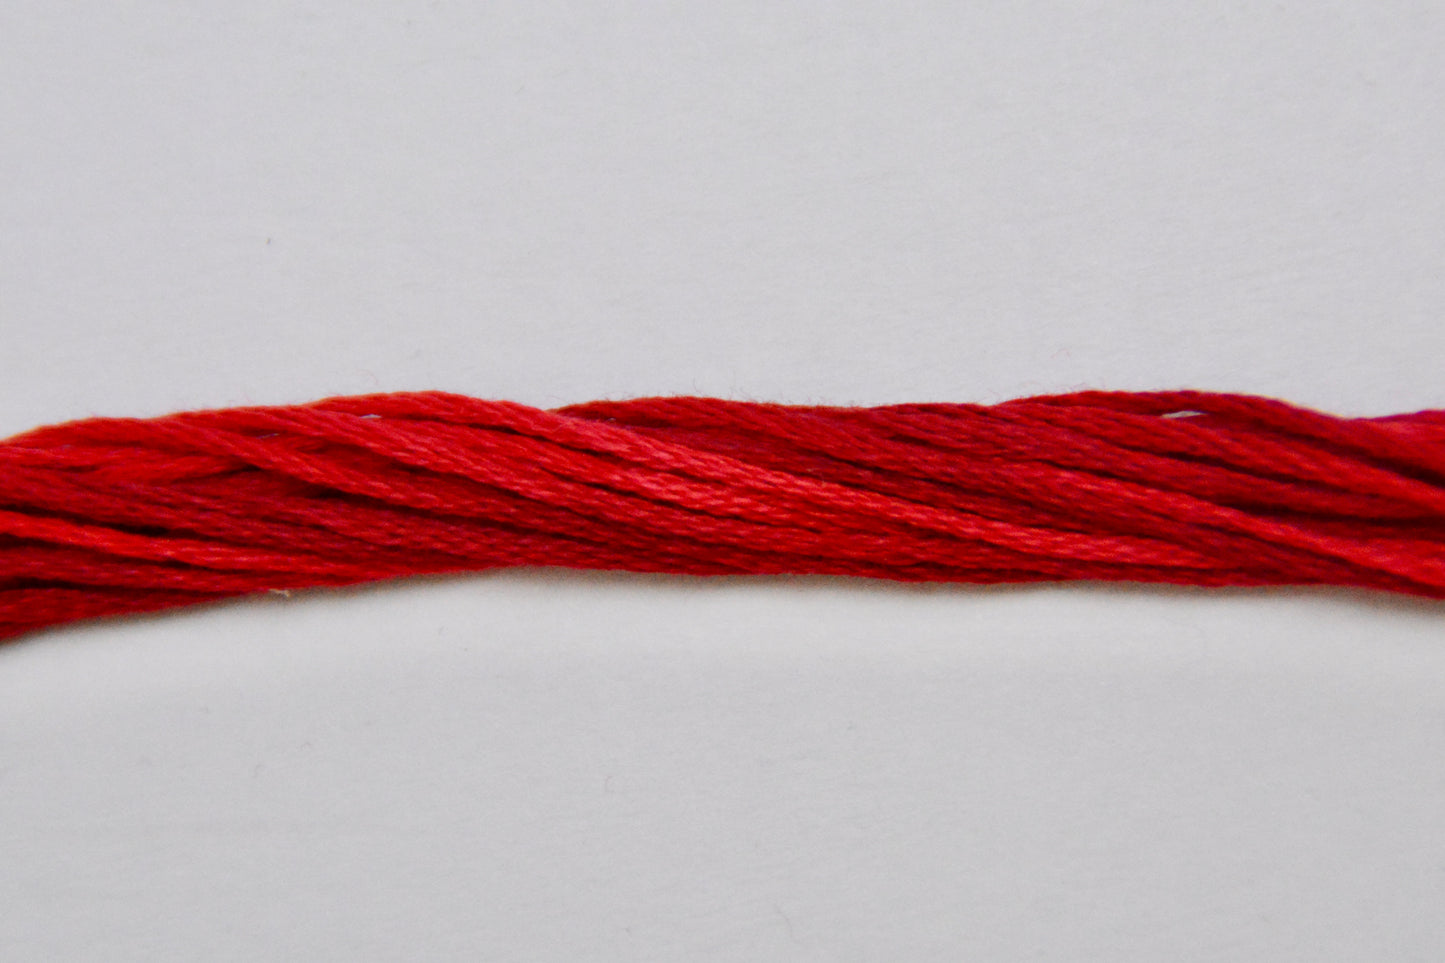 Turkish Red 2266 Weeks Dye Works 6-Strand Hand-Dyed Embroidery Floss